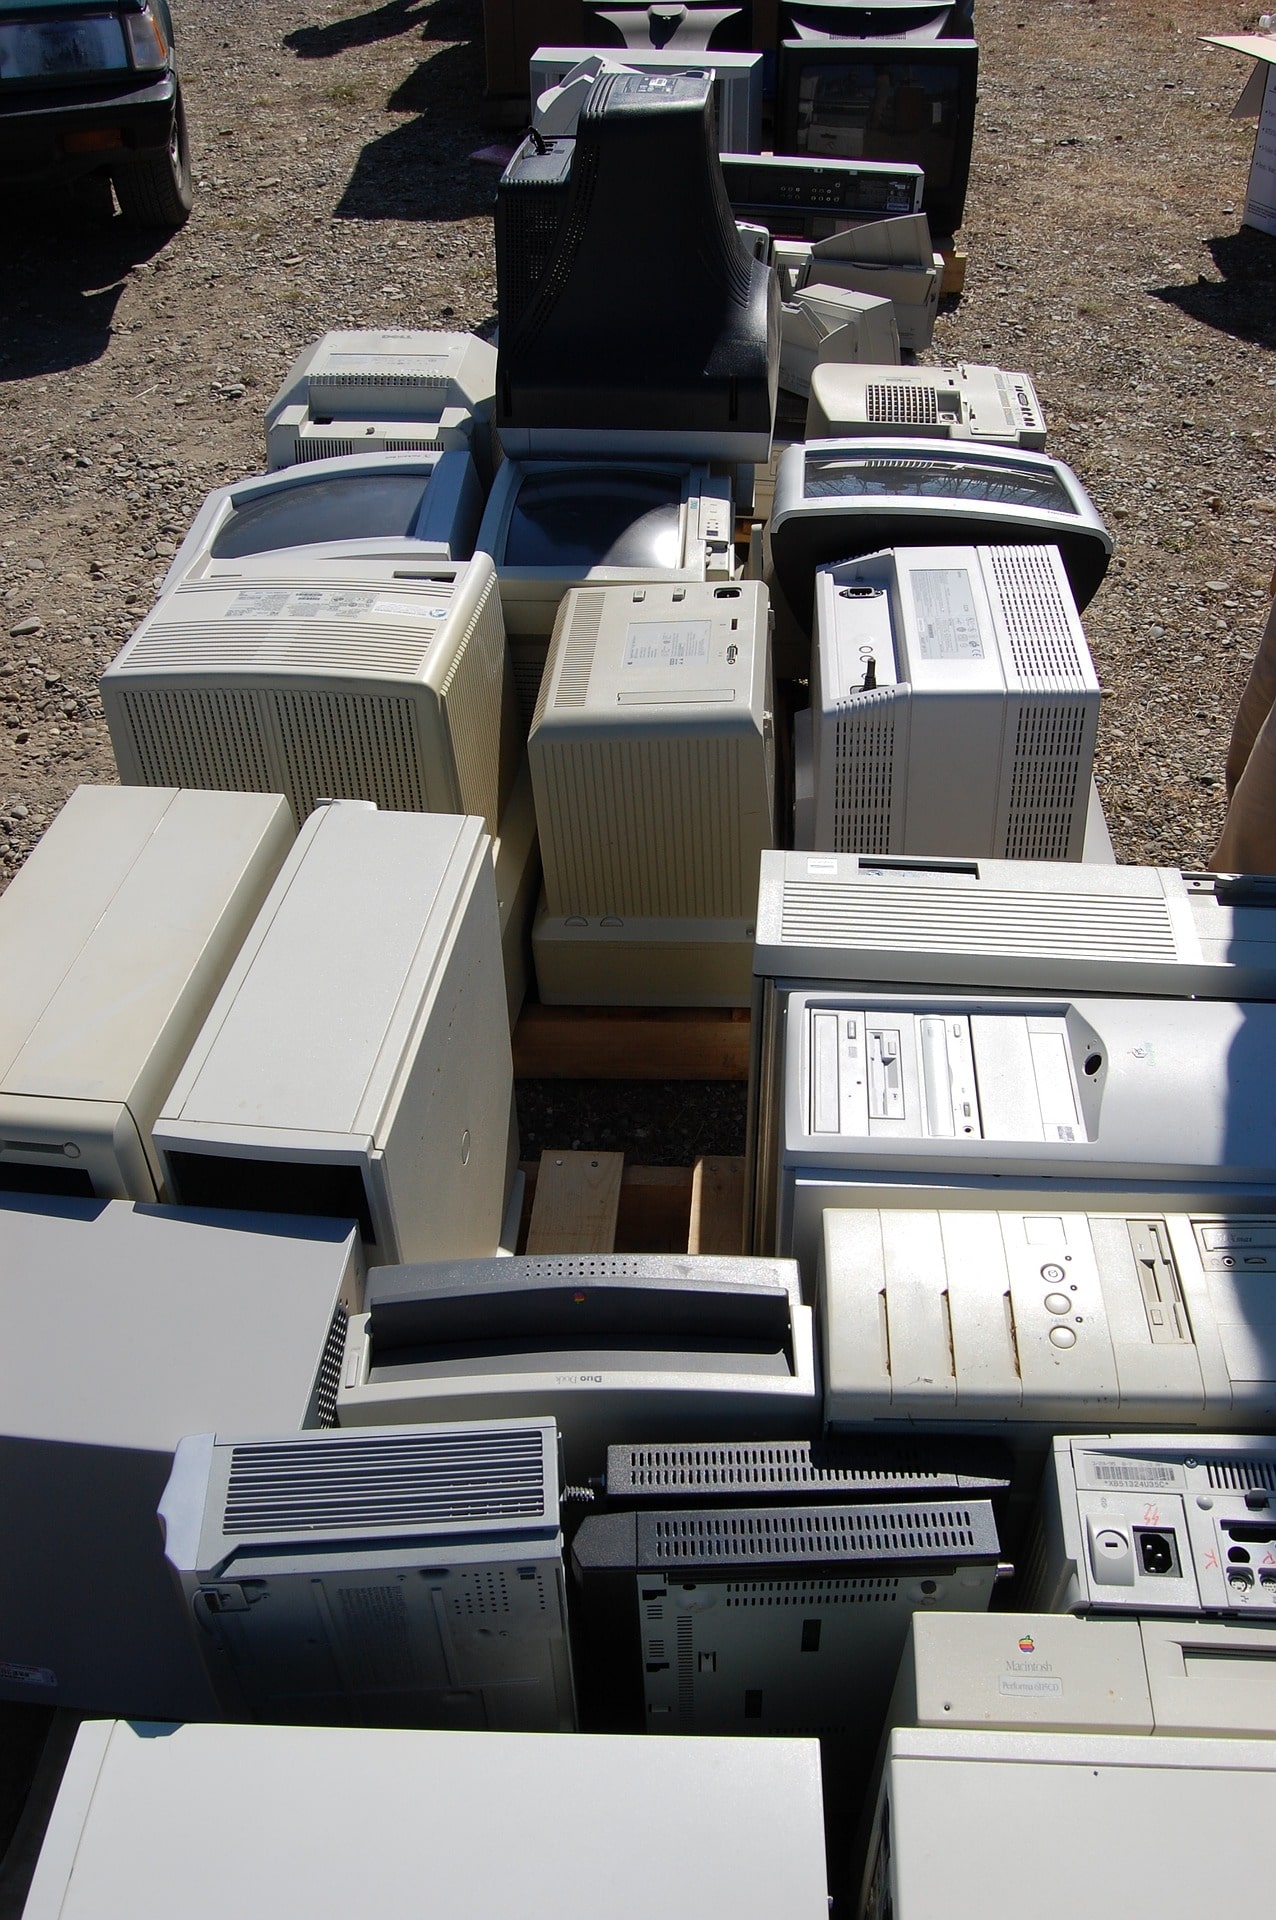 Computer Recycling in Sioux Falls - Seam Services